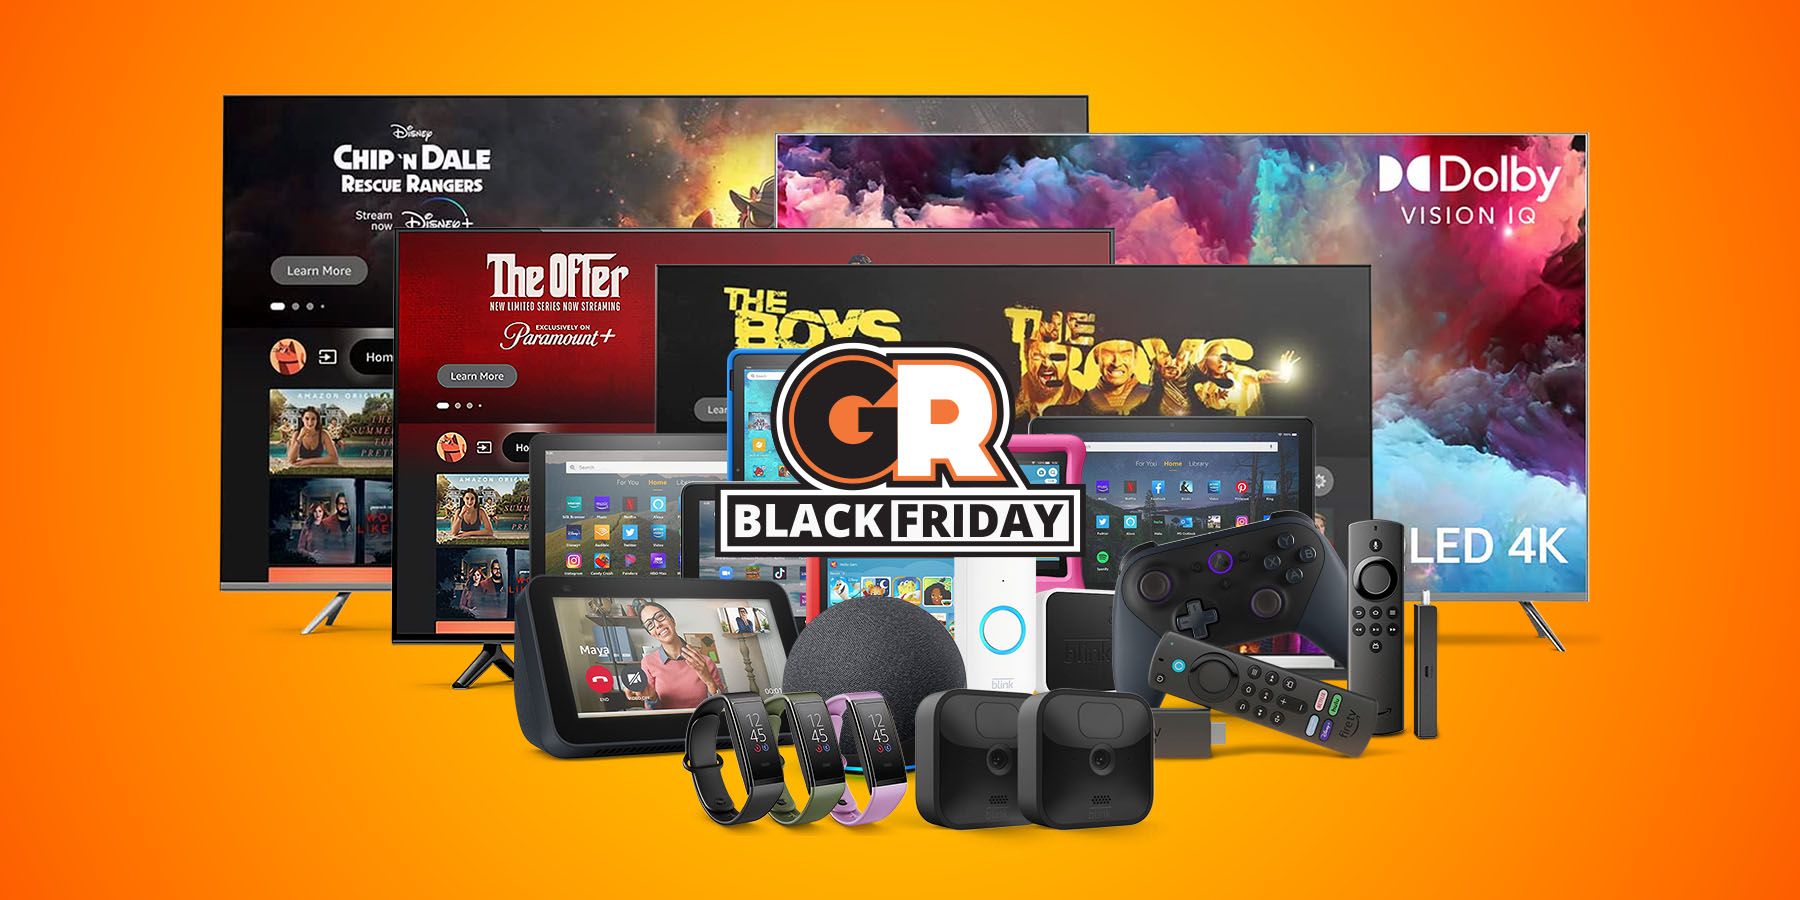 The Best Early Black Friday Electronics and Devices Deals Thumb